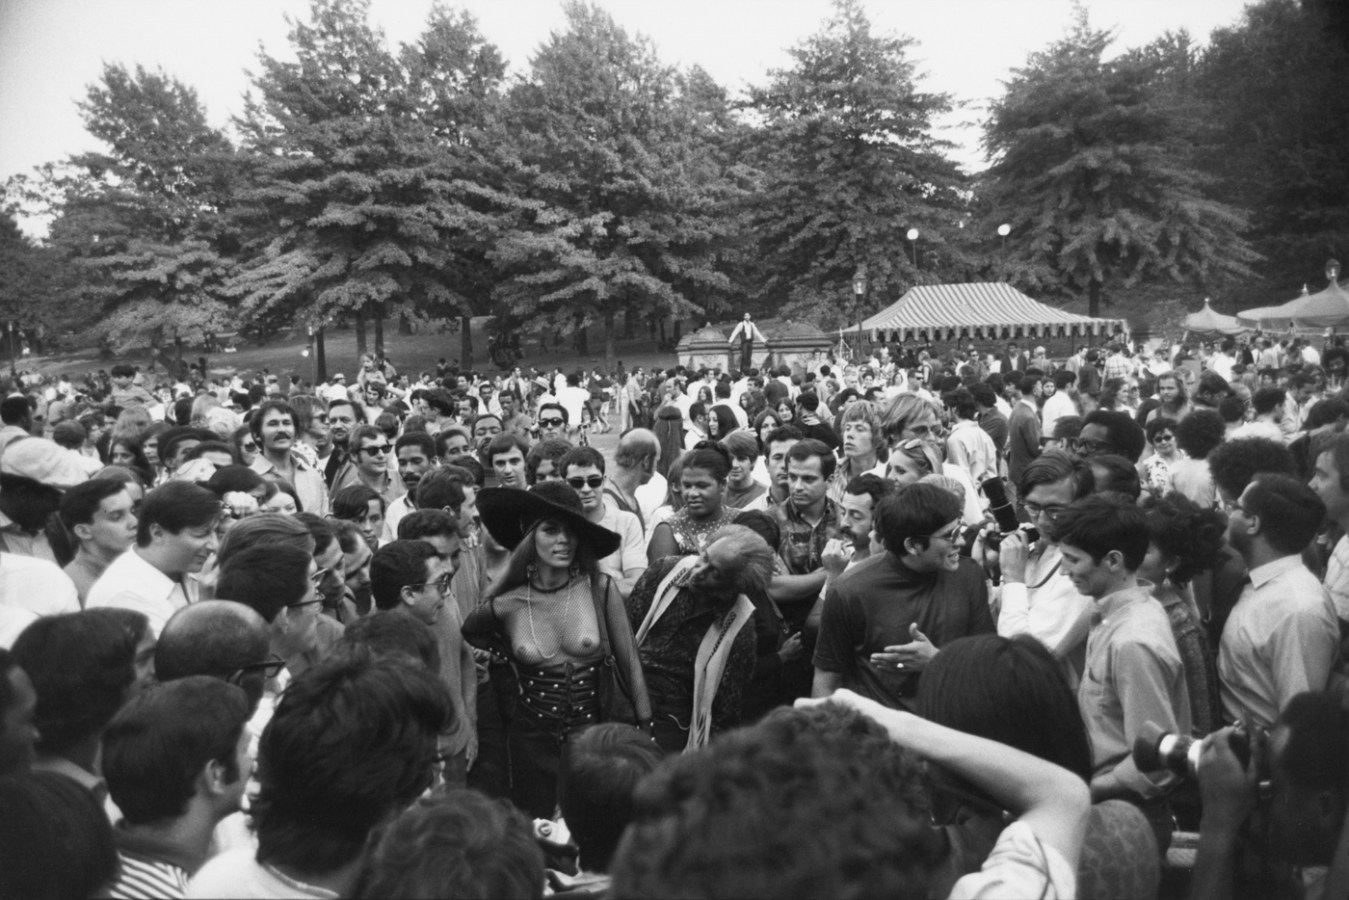 Black-and-white-photograph of a bare-breasted woman wearing a large hat in a crowd of people in a park